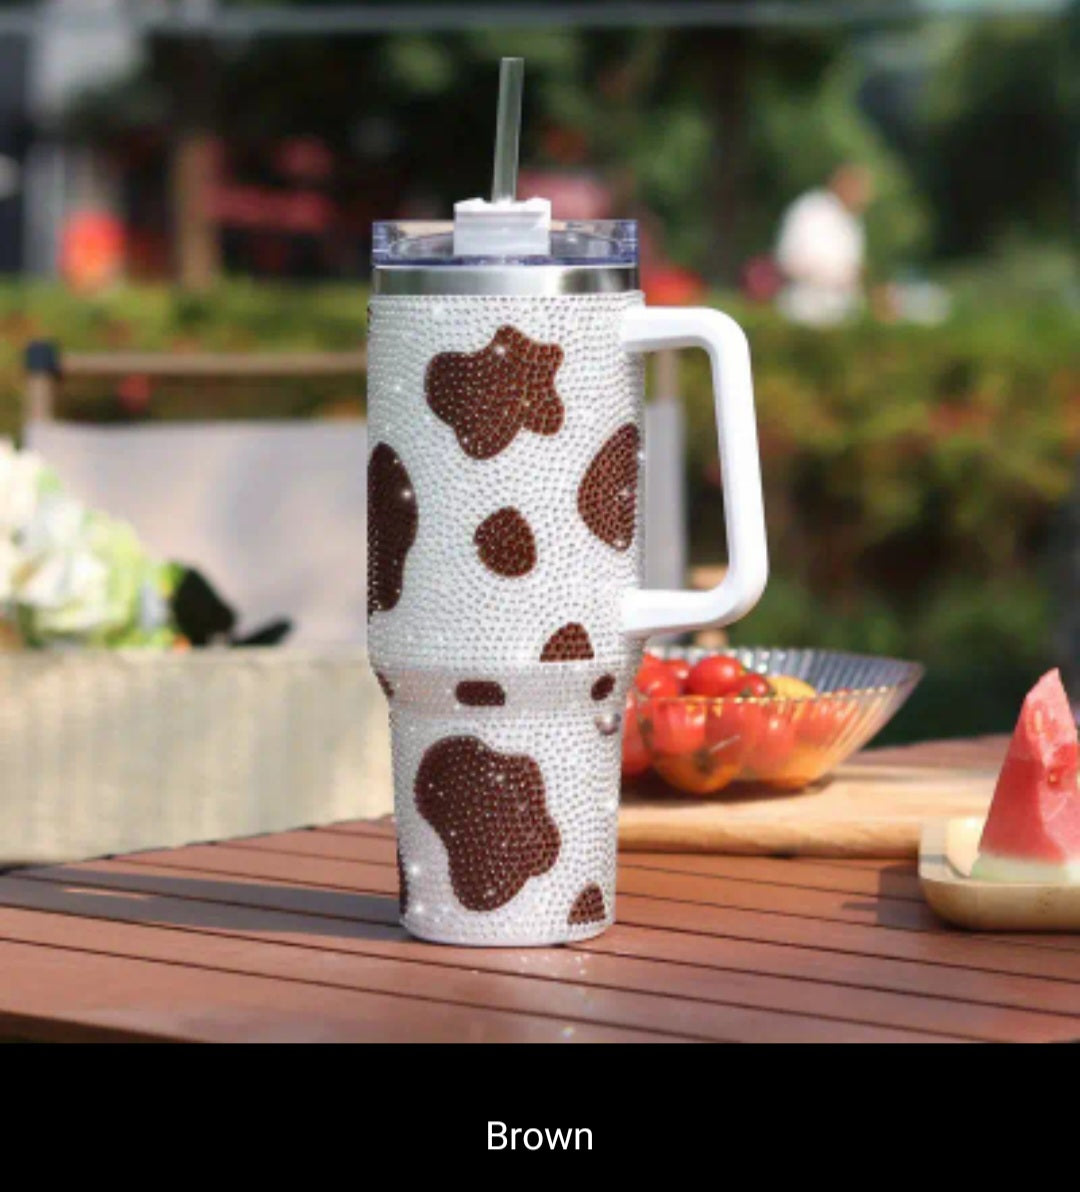 Cream Cow Tumbler Drinking Cup Glass Vinyl Cow Print Cream Cup Gifts 